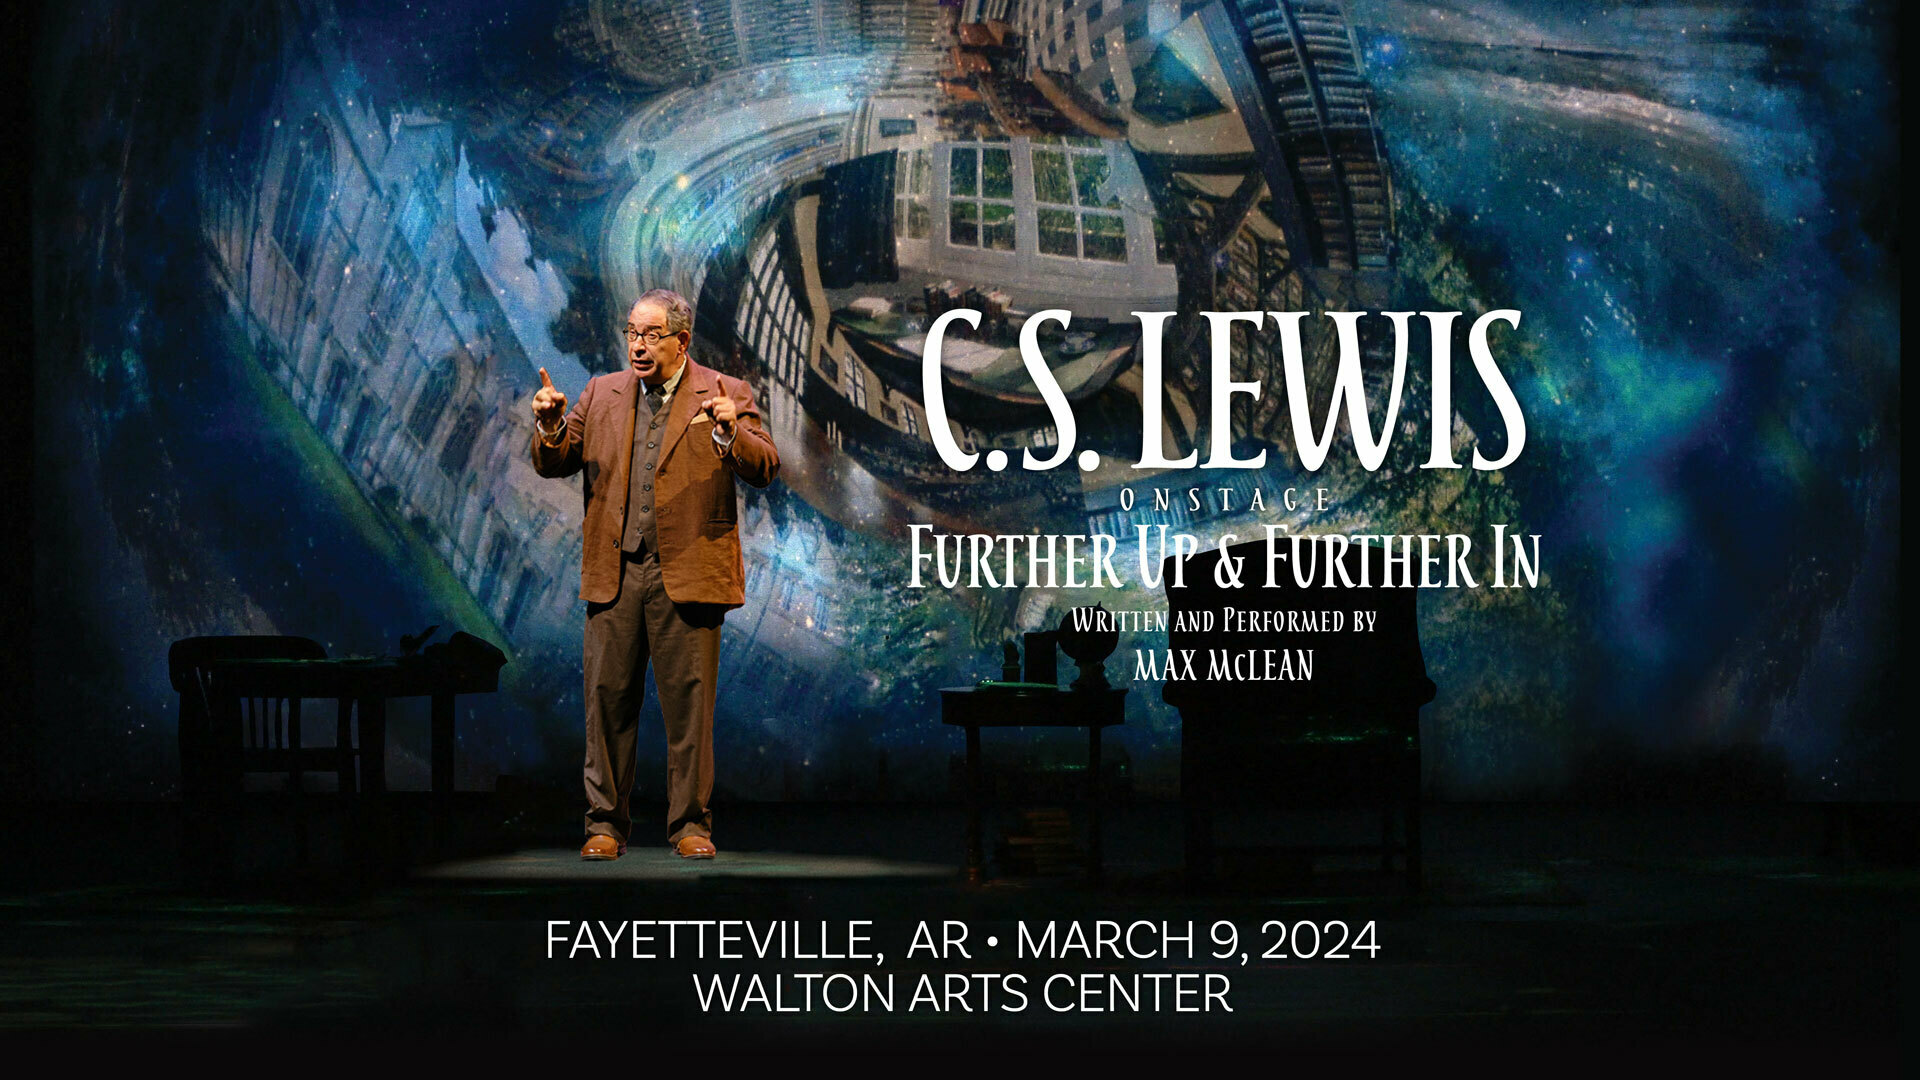 C.S. Lewis On Stage: Further Up and Further In (Fayetteville, AR), Fayetteville, Arkansas, United States